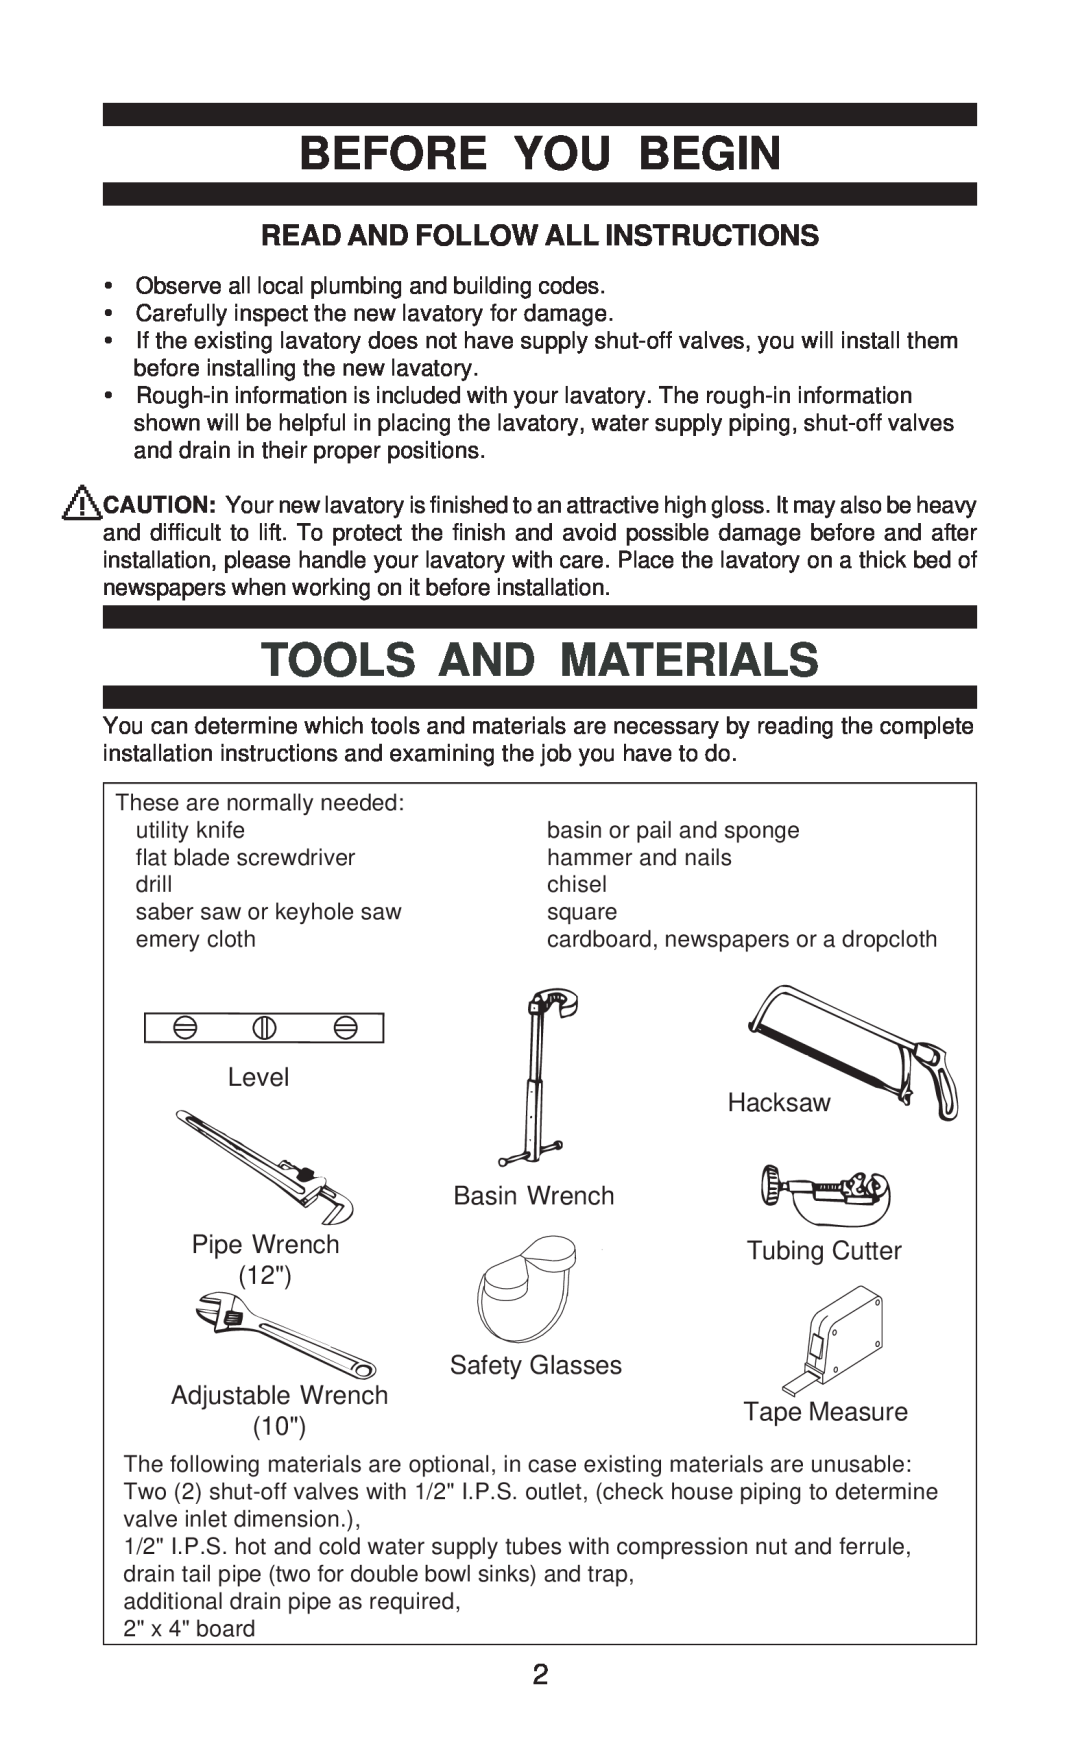 Jacuzzi BM43000 Tools And Materials, Read And Follow All Instructions, Before You Begin, Level, Hacksaw, Pipe Wrench 